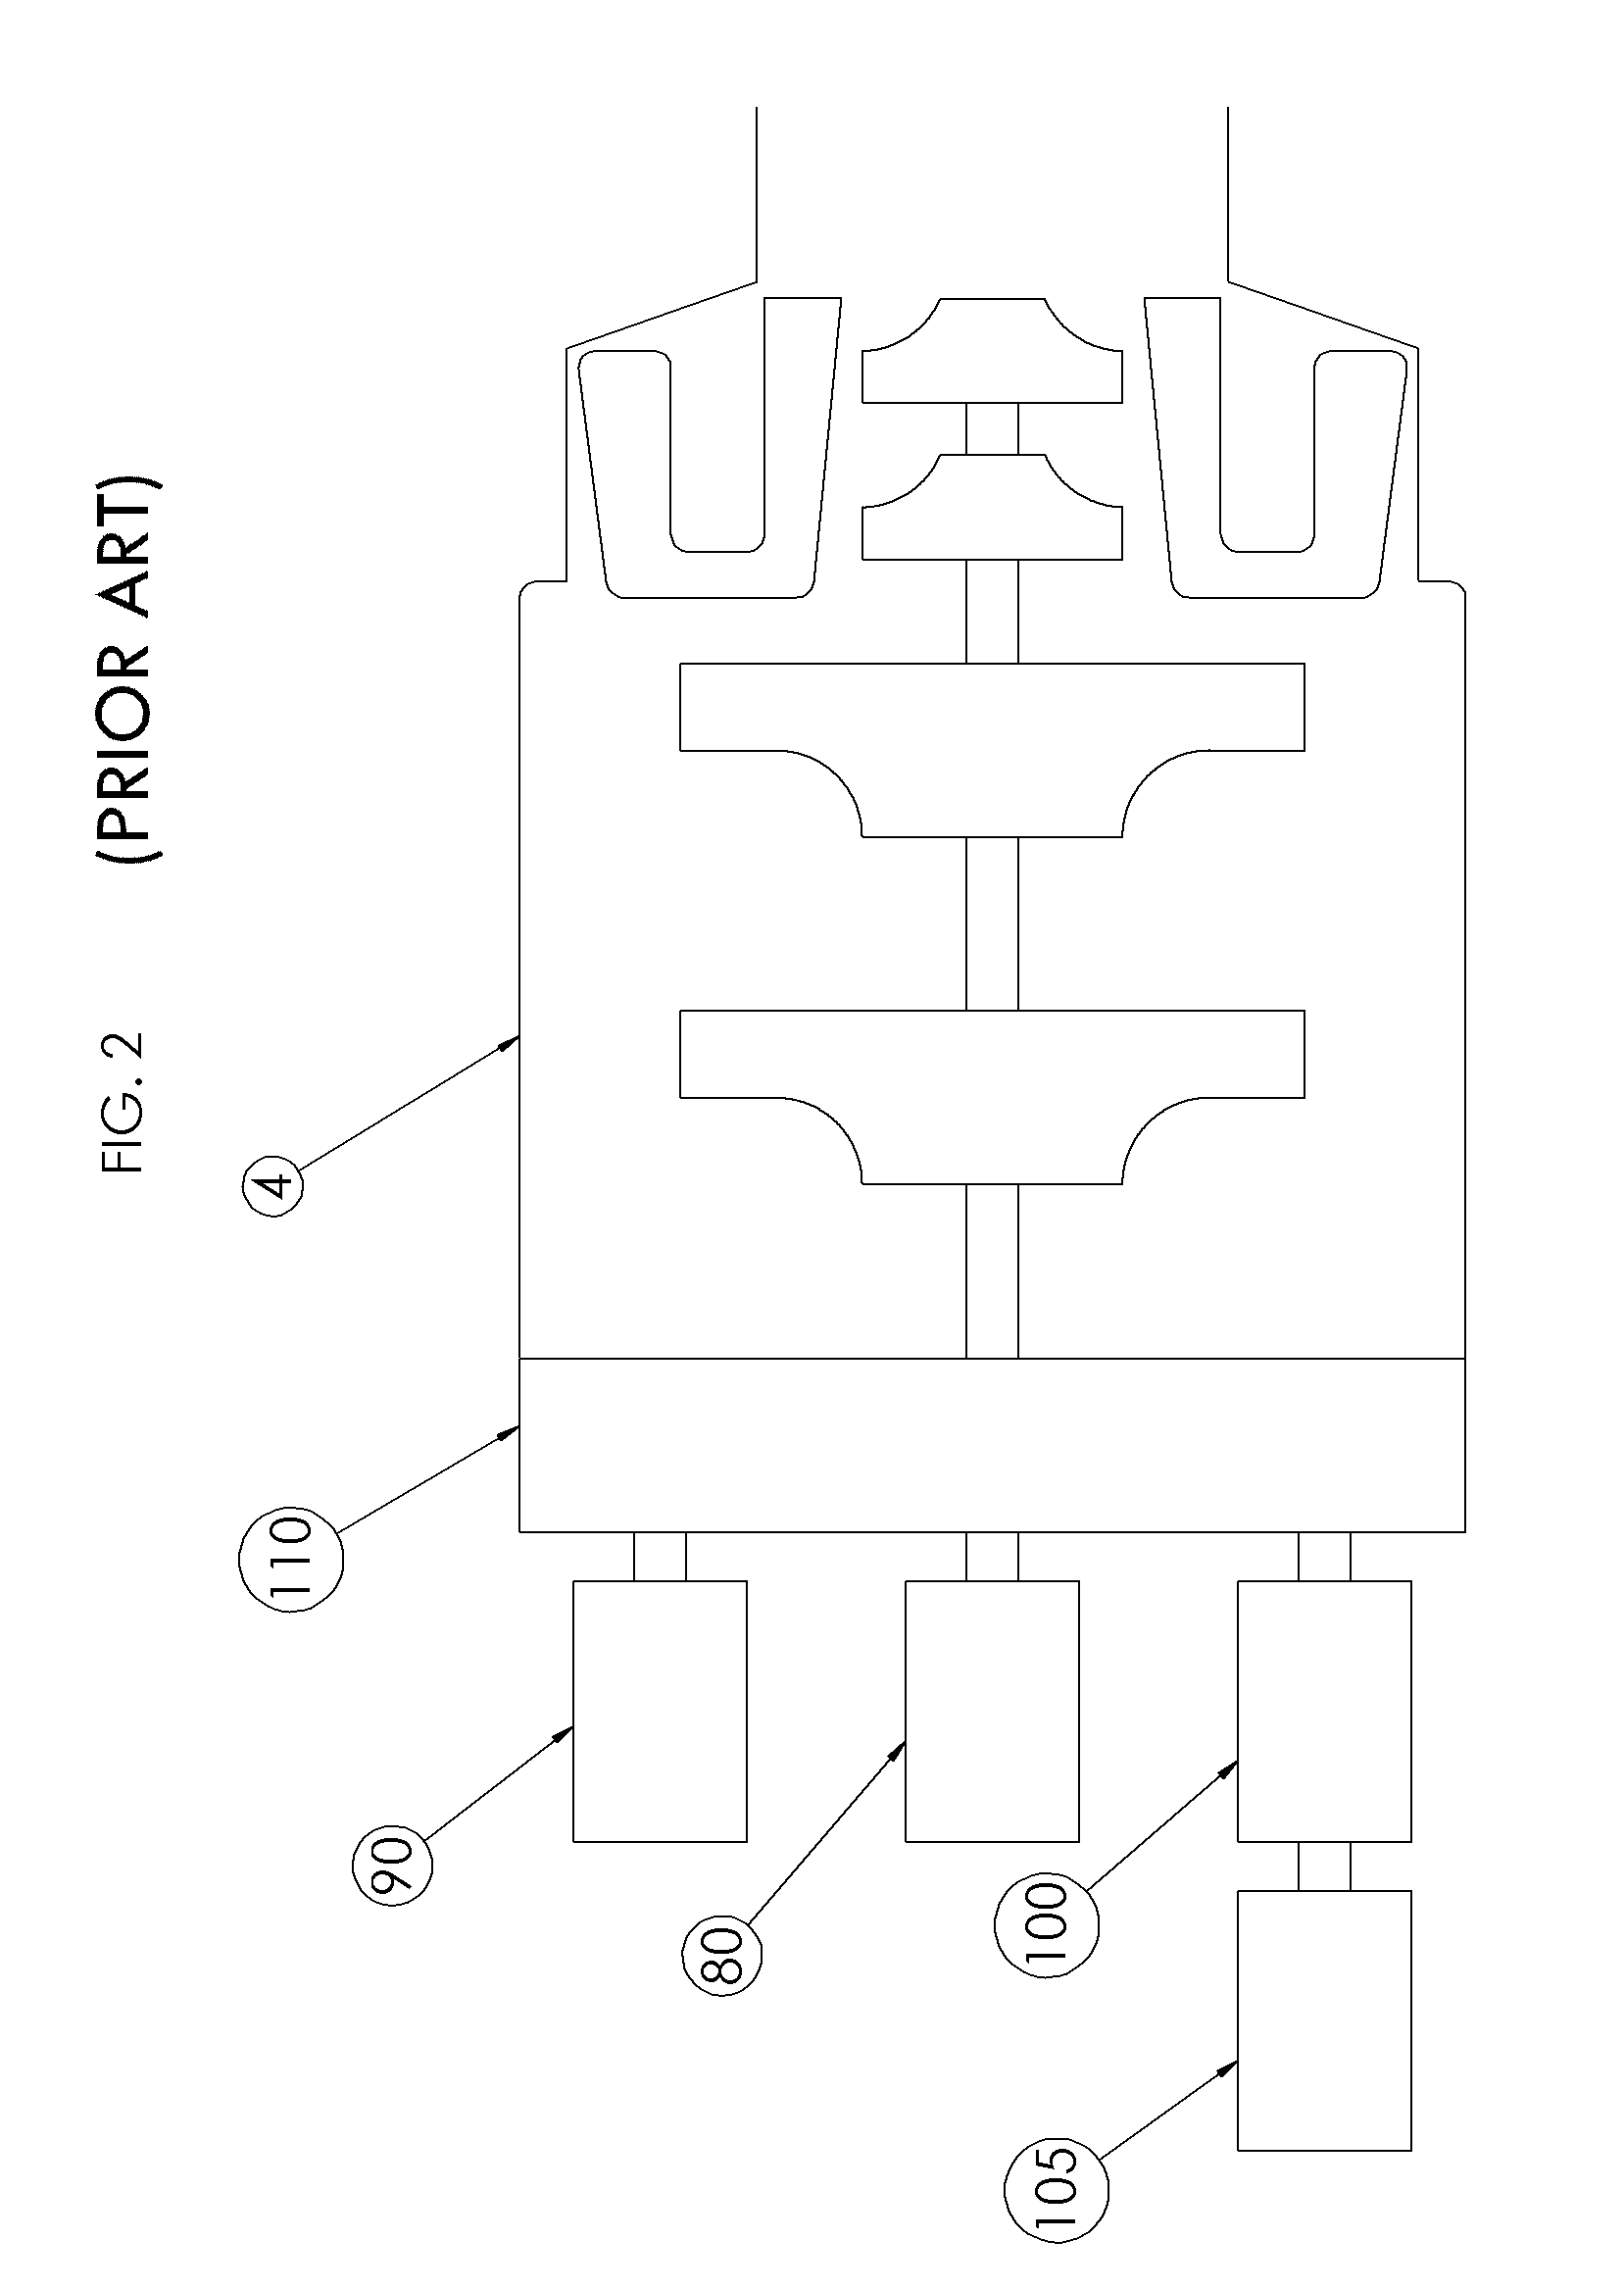 Aircraft with disengageable engine and auxiliary power unit components